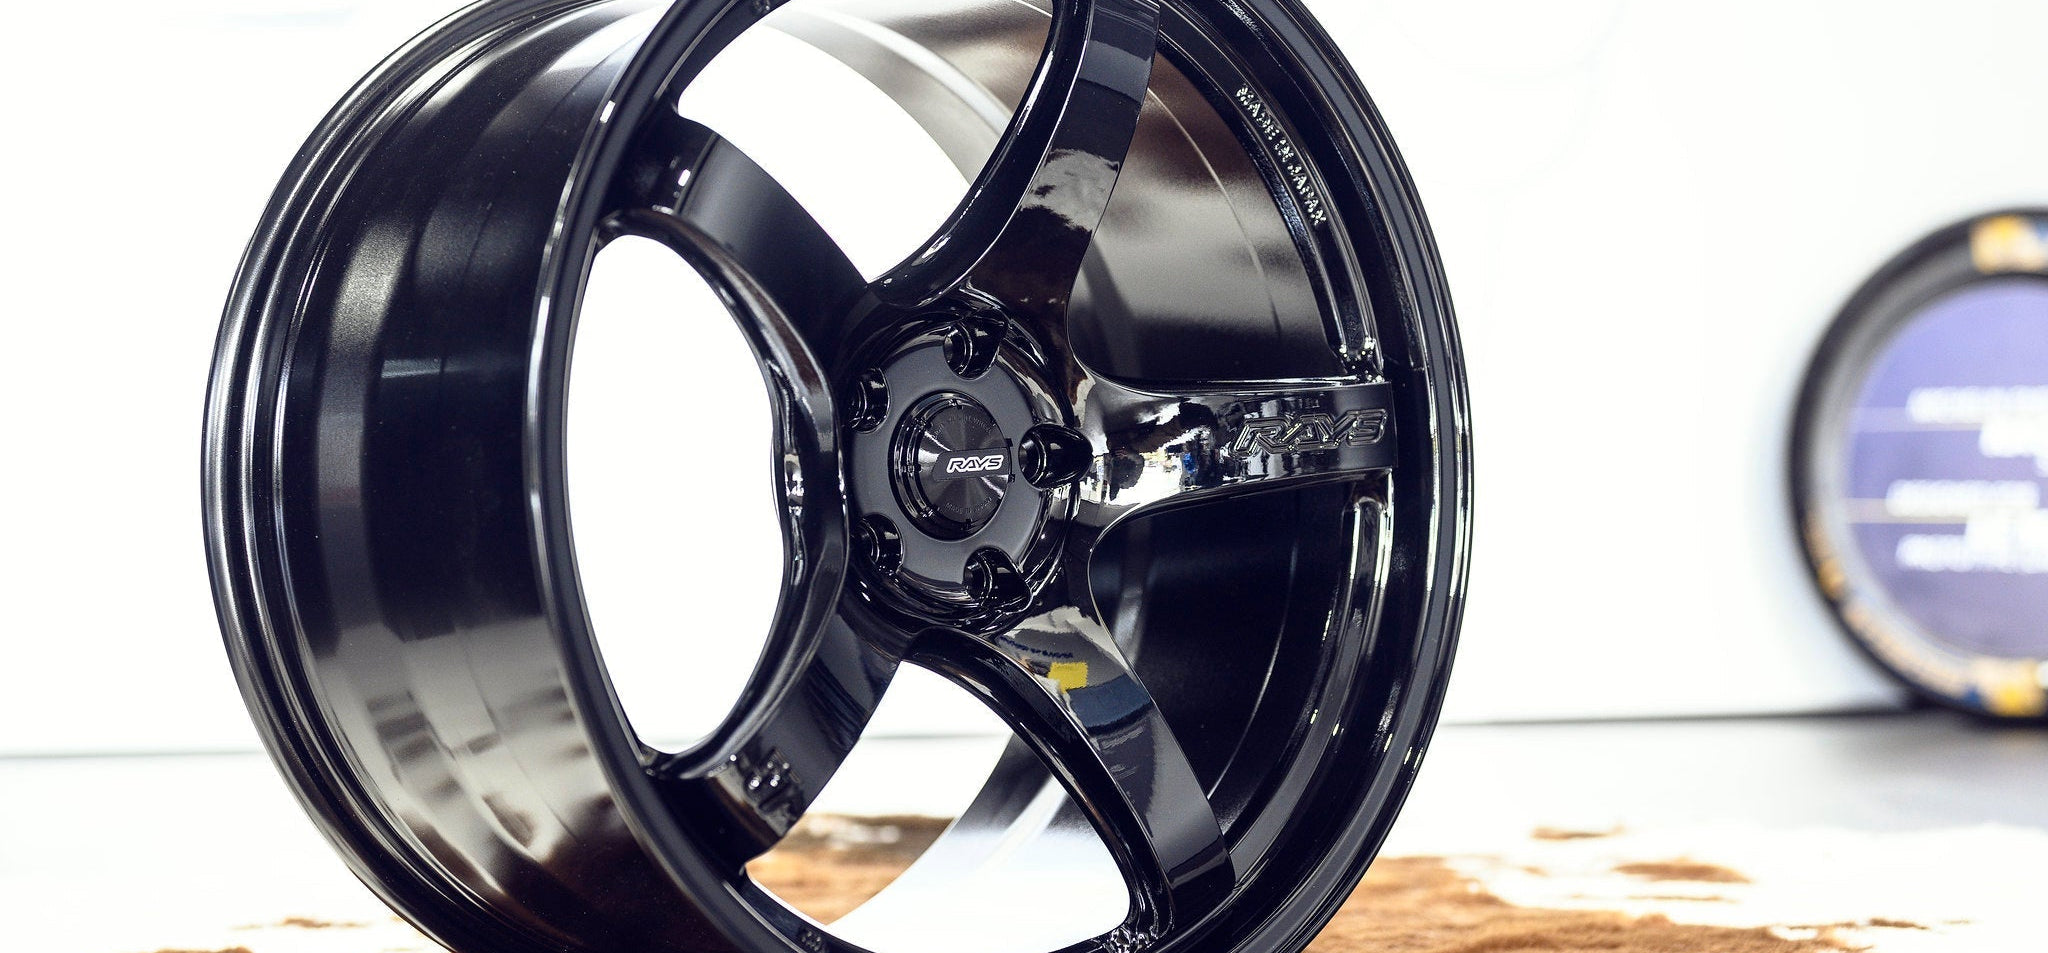 gramLIGHTS 57CR 19" - Premium Wheels from Gram Lights - From just $550.0! Shop now at MK MOTORSPORTS